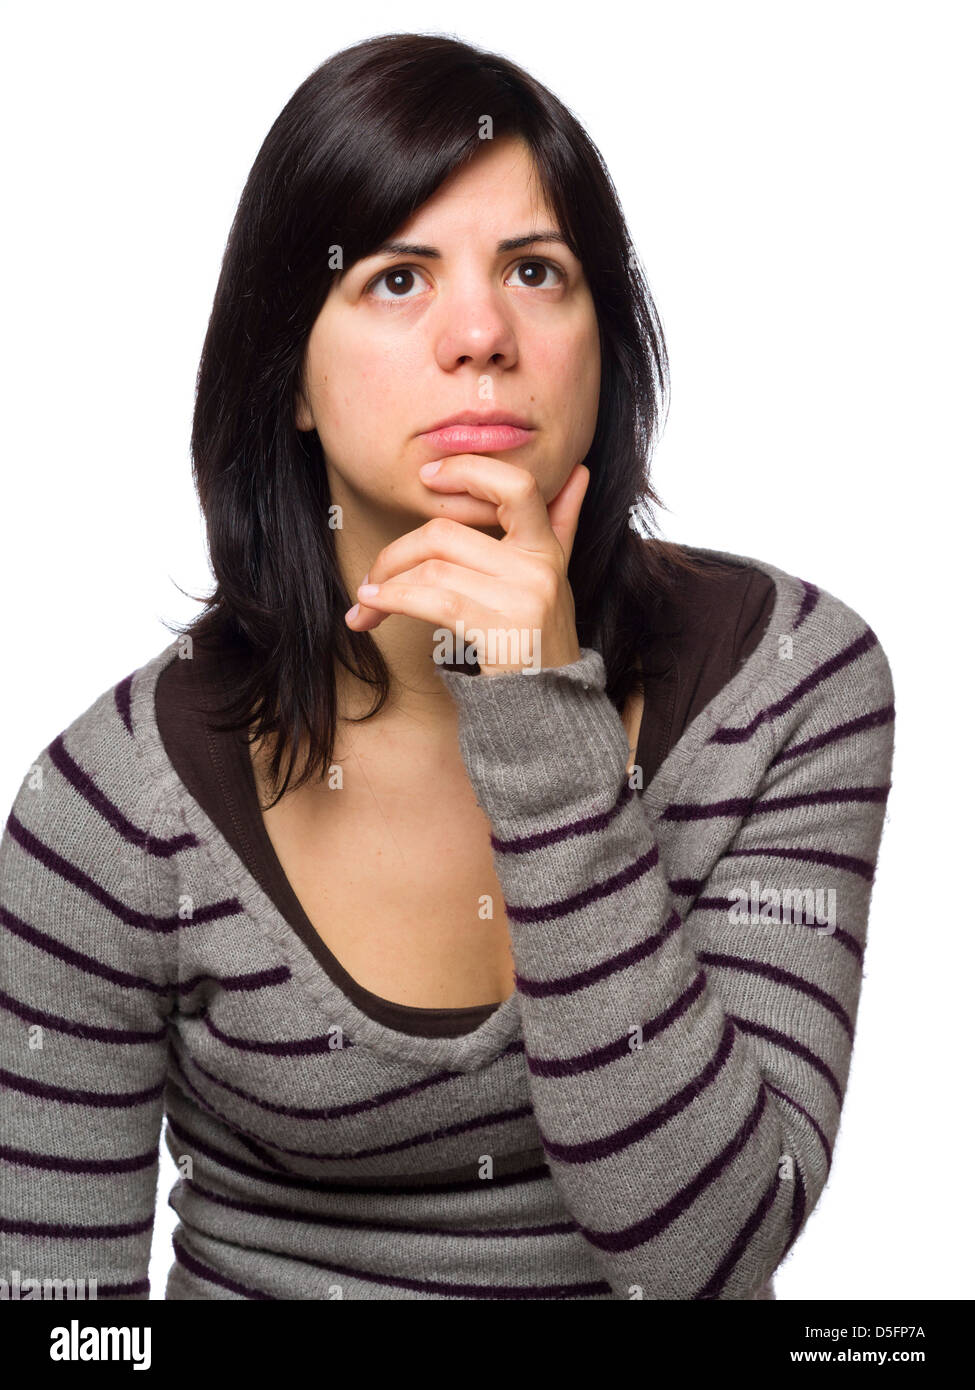 Portrait of pensive young woman with hand on chin isolated on white background Stock Photo